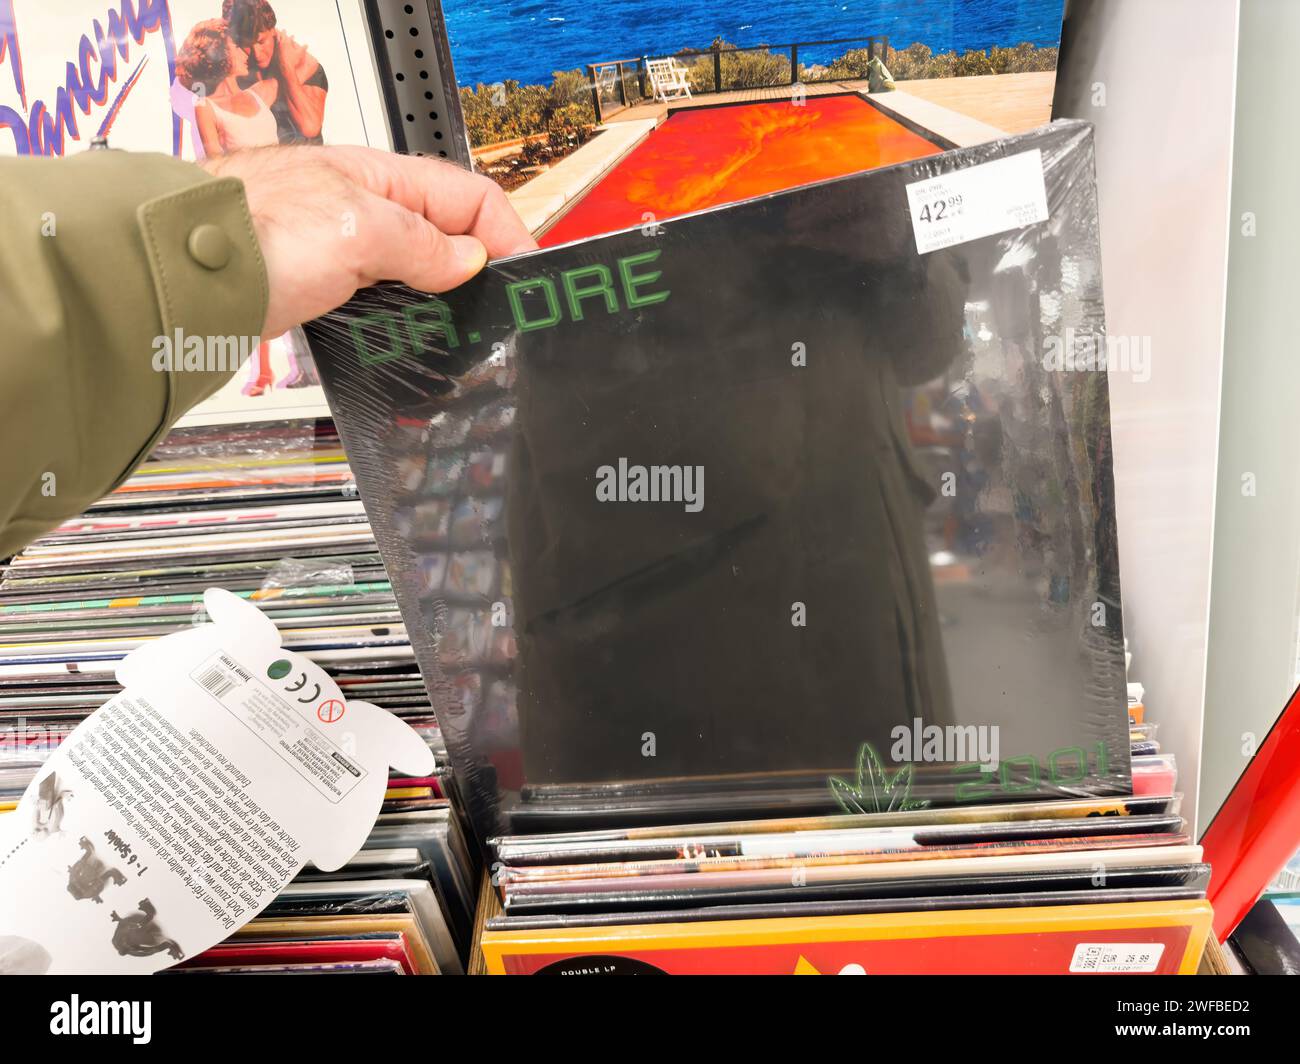 Berlin, Germany - Jan 18, 2024: A POV shot of a male hand shopping for a Dr. Dre music LP vinyl in an iconic album store inside the music store. Stock Photo